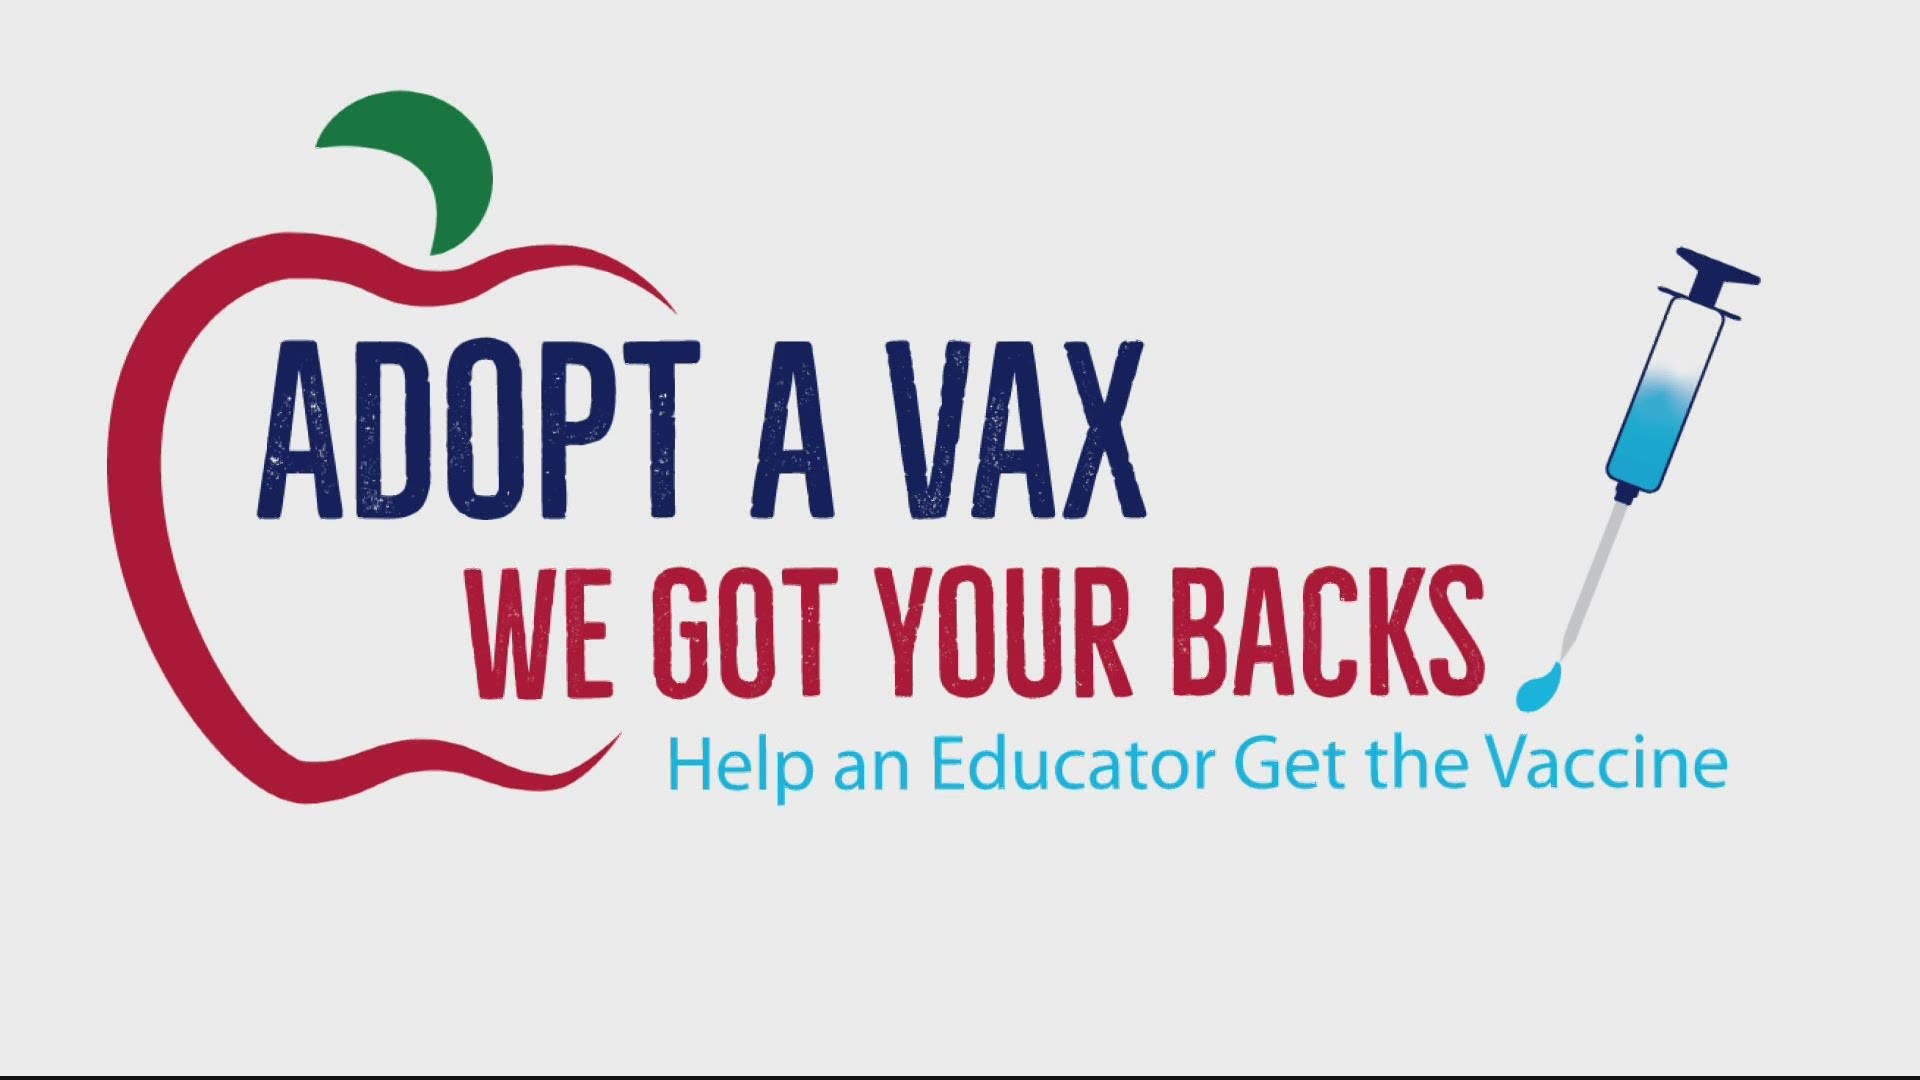 Adopt a Vax is working together to help teachers in Montgomery County get vaccinated